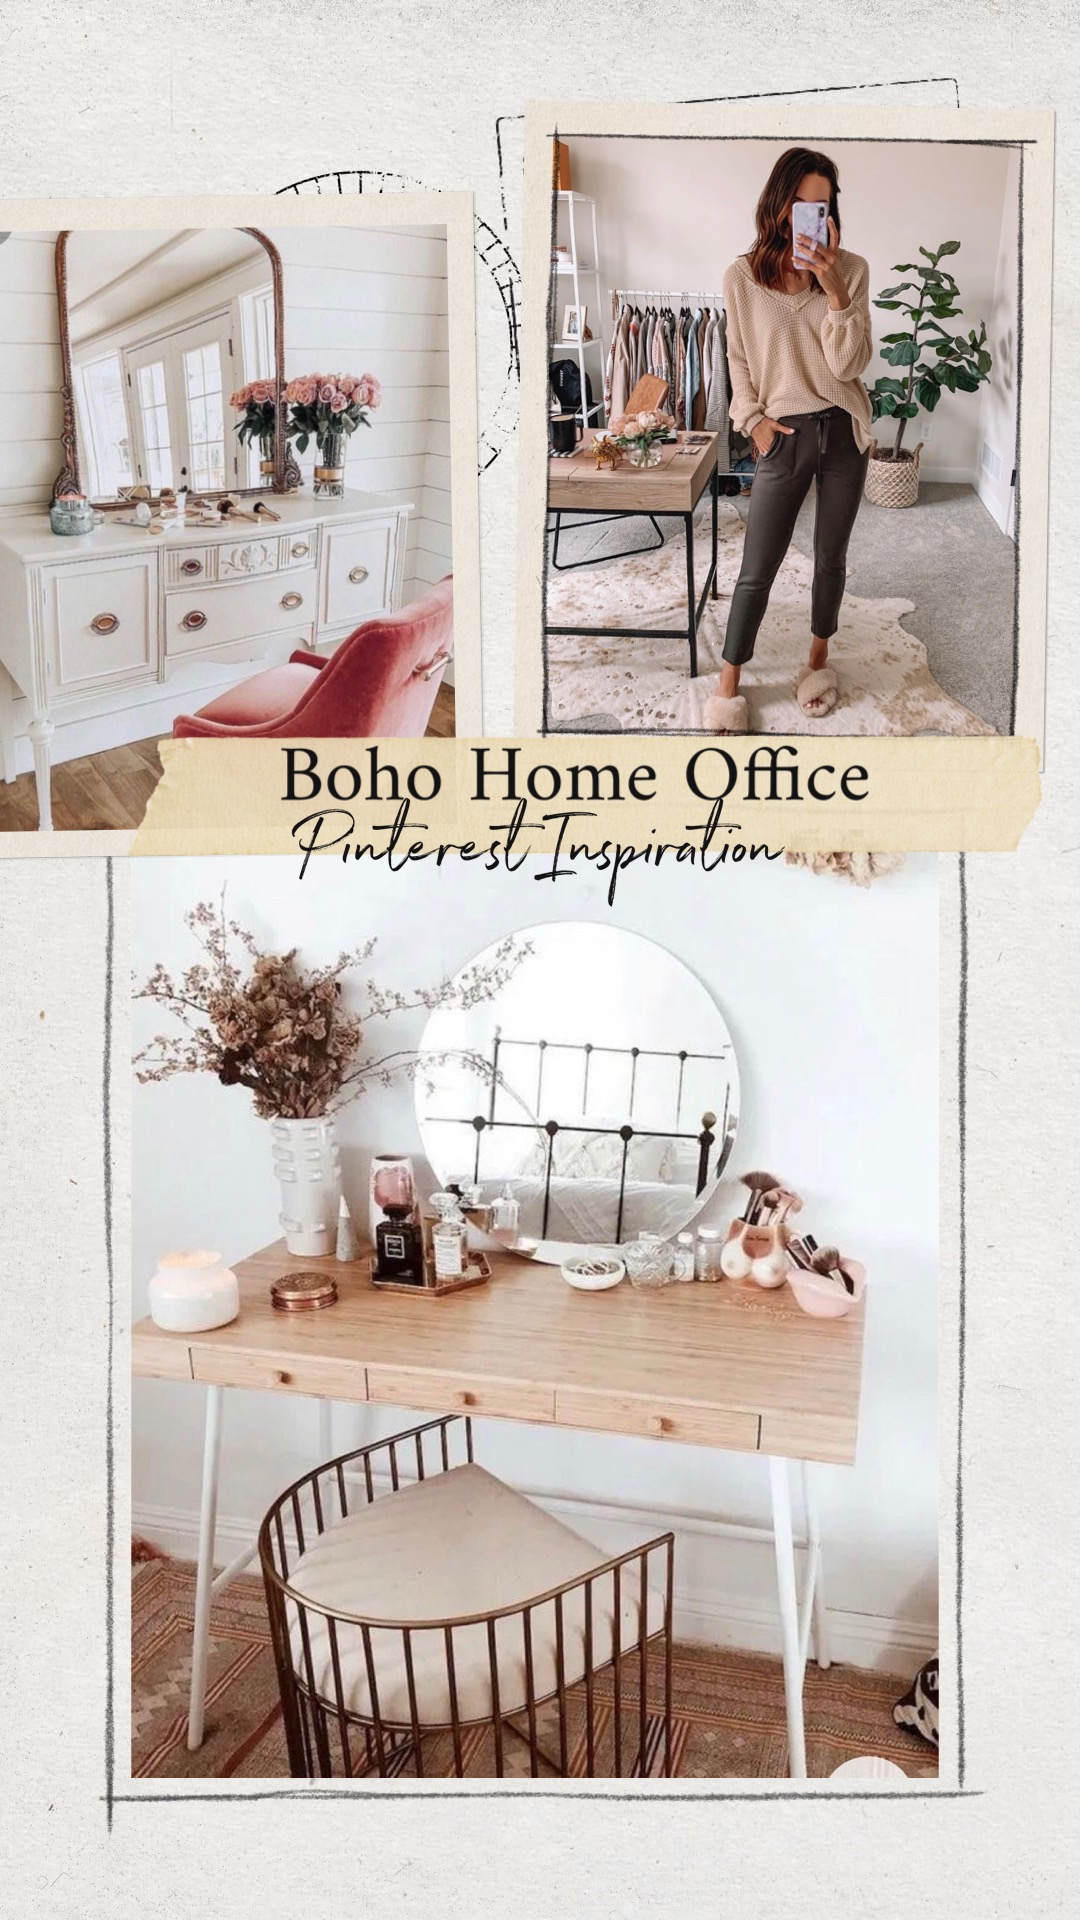 Boho Home Office Ideas | My Boho Home Office for Blogging | Affordable by Amanda 